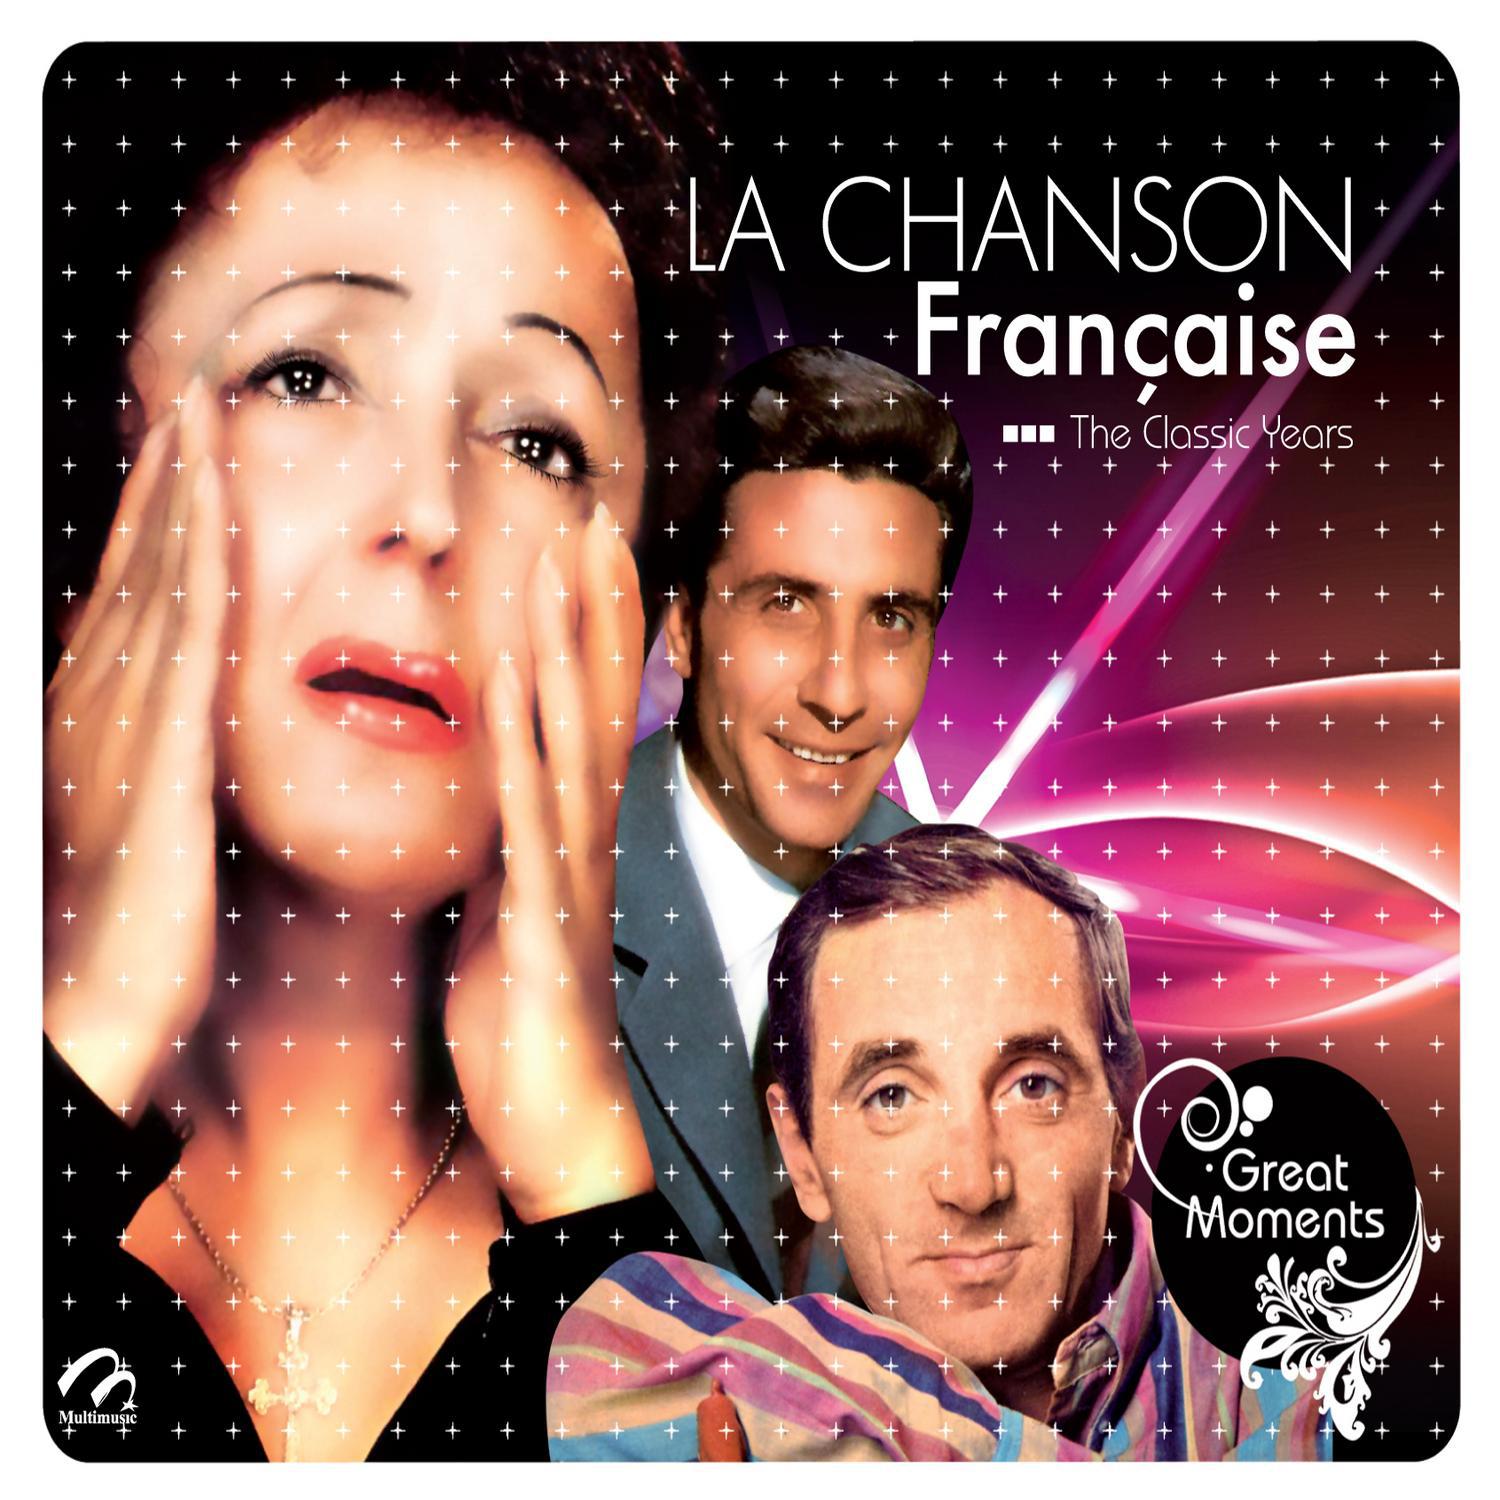 La Chanson Francaise The Classic Years